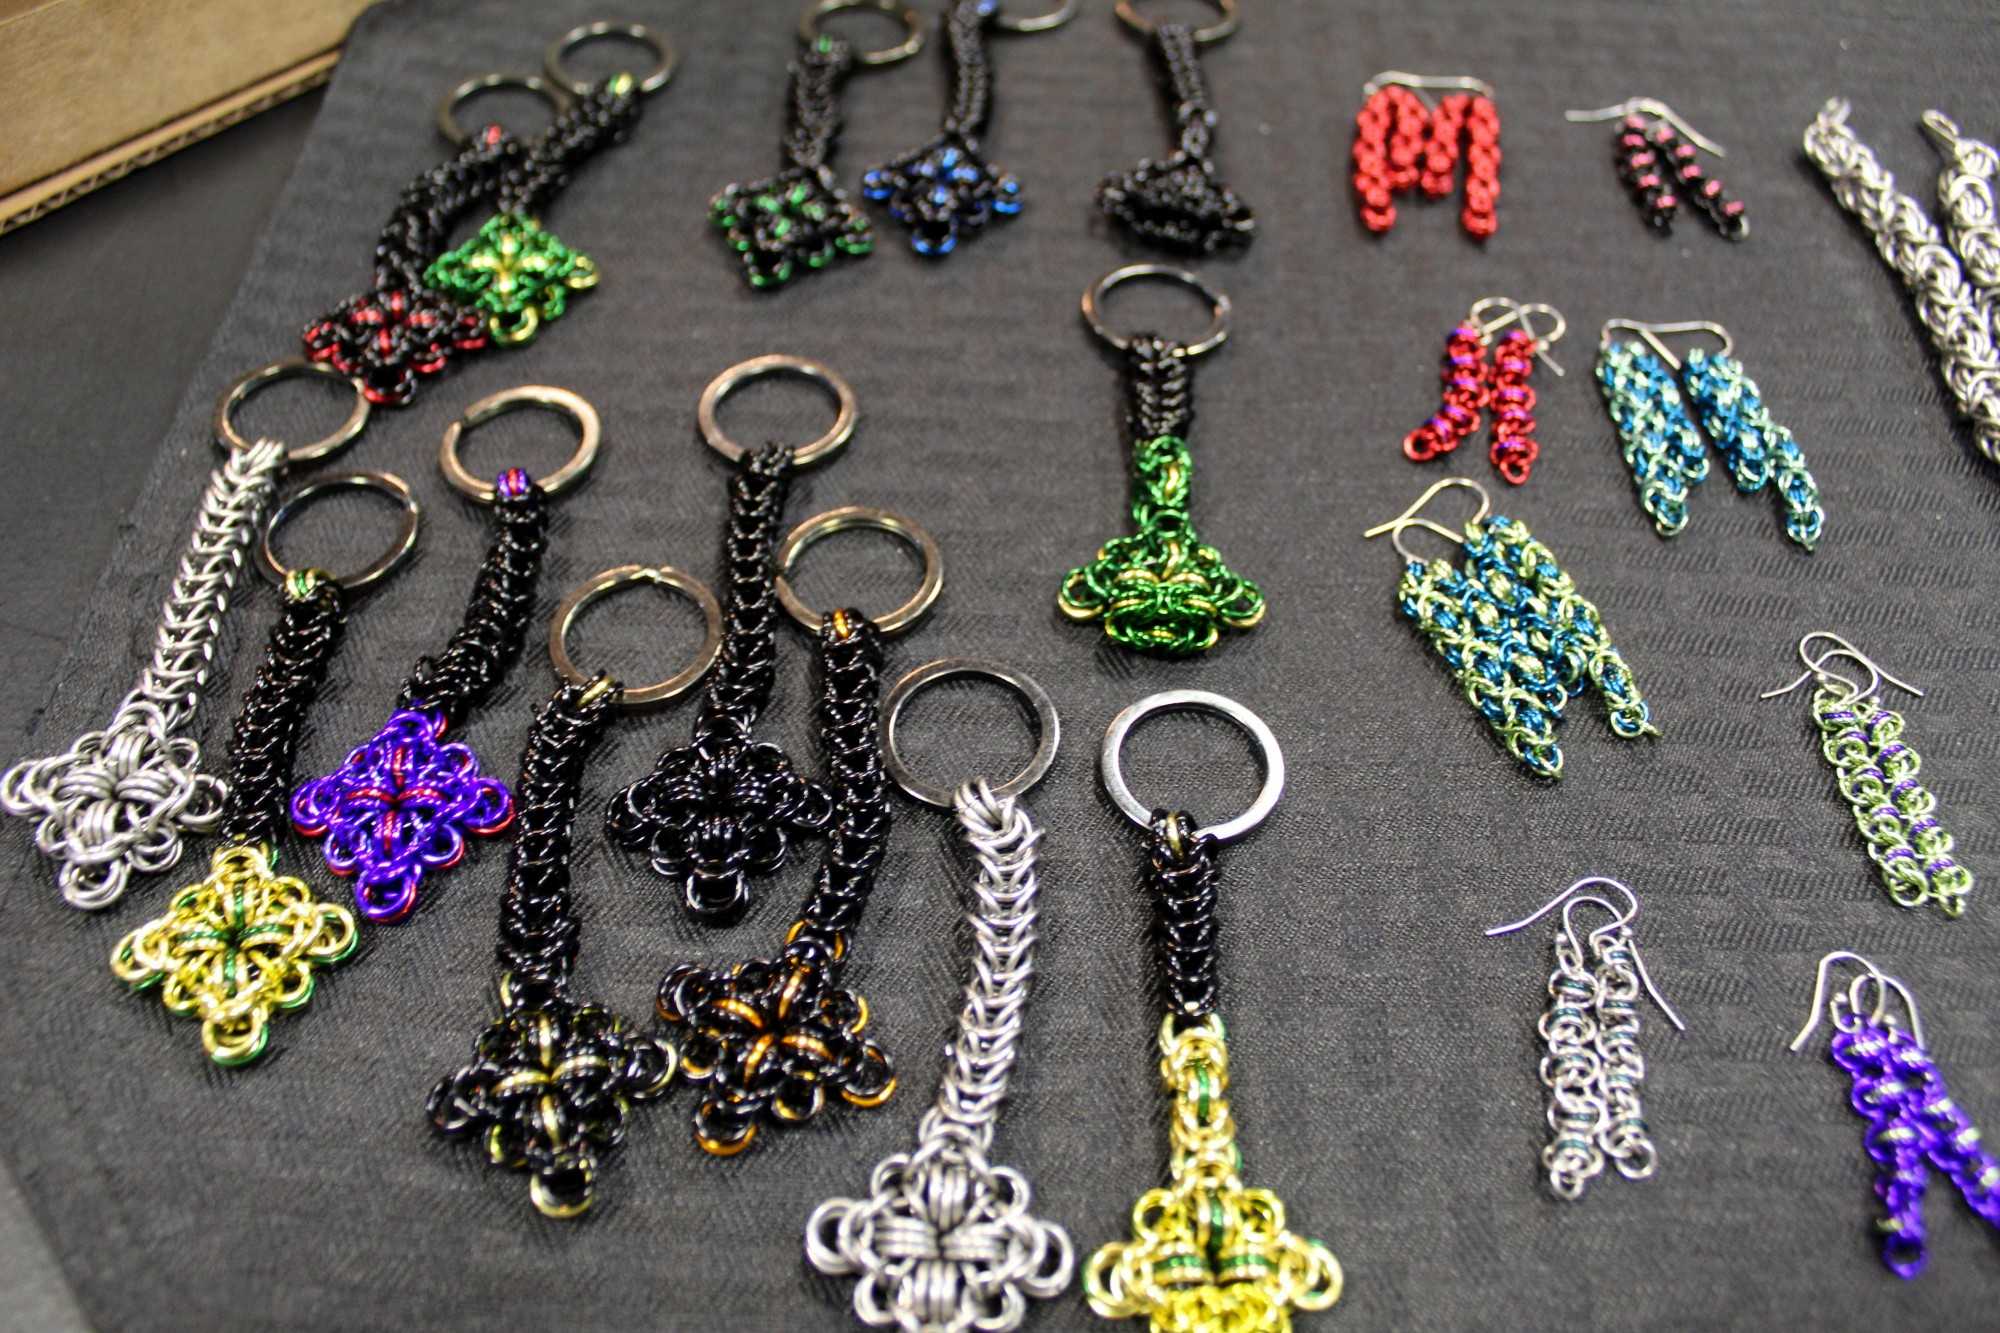  Chainmail can also be found every week made from Tucson resident Rokin Drakonies. Tucson Games and Gadgets supports small local businesses, some businesses have been selling through the store since it opened.